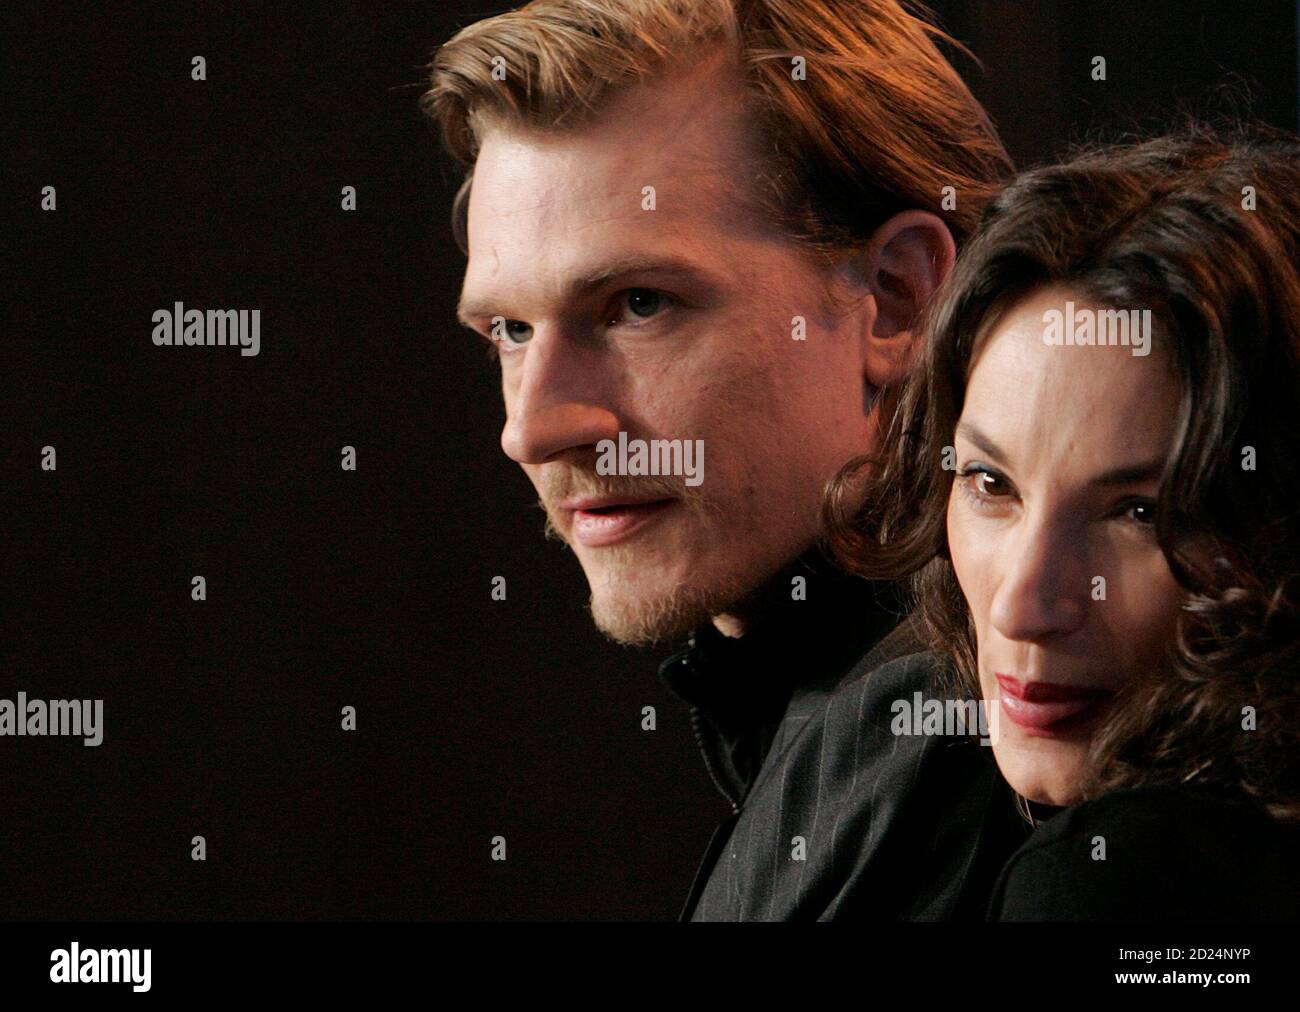 Hache Photocall High Resolution Stock Photography and Images - Alamy